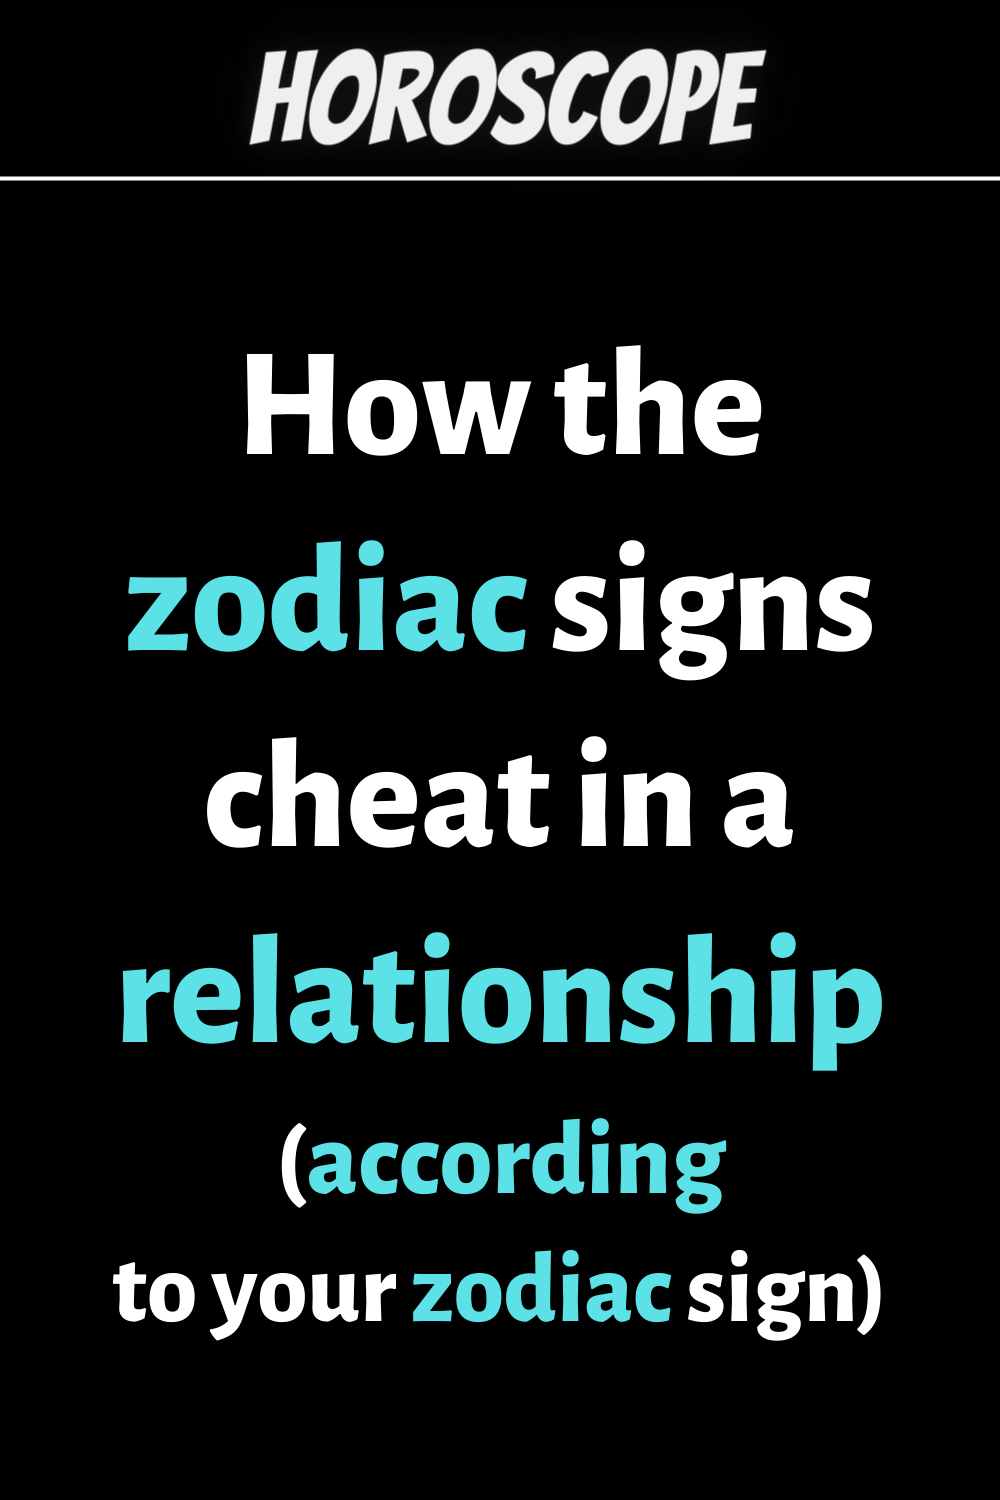 How the zodiac signs cheat in a relationship